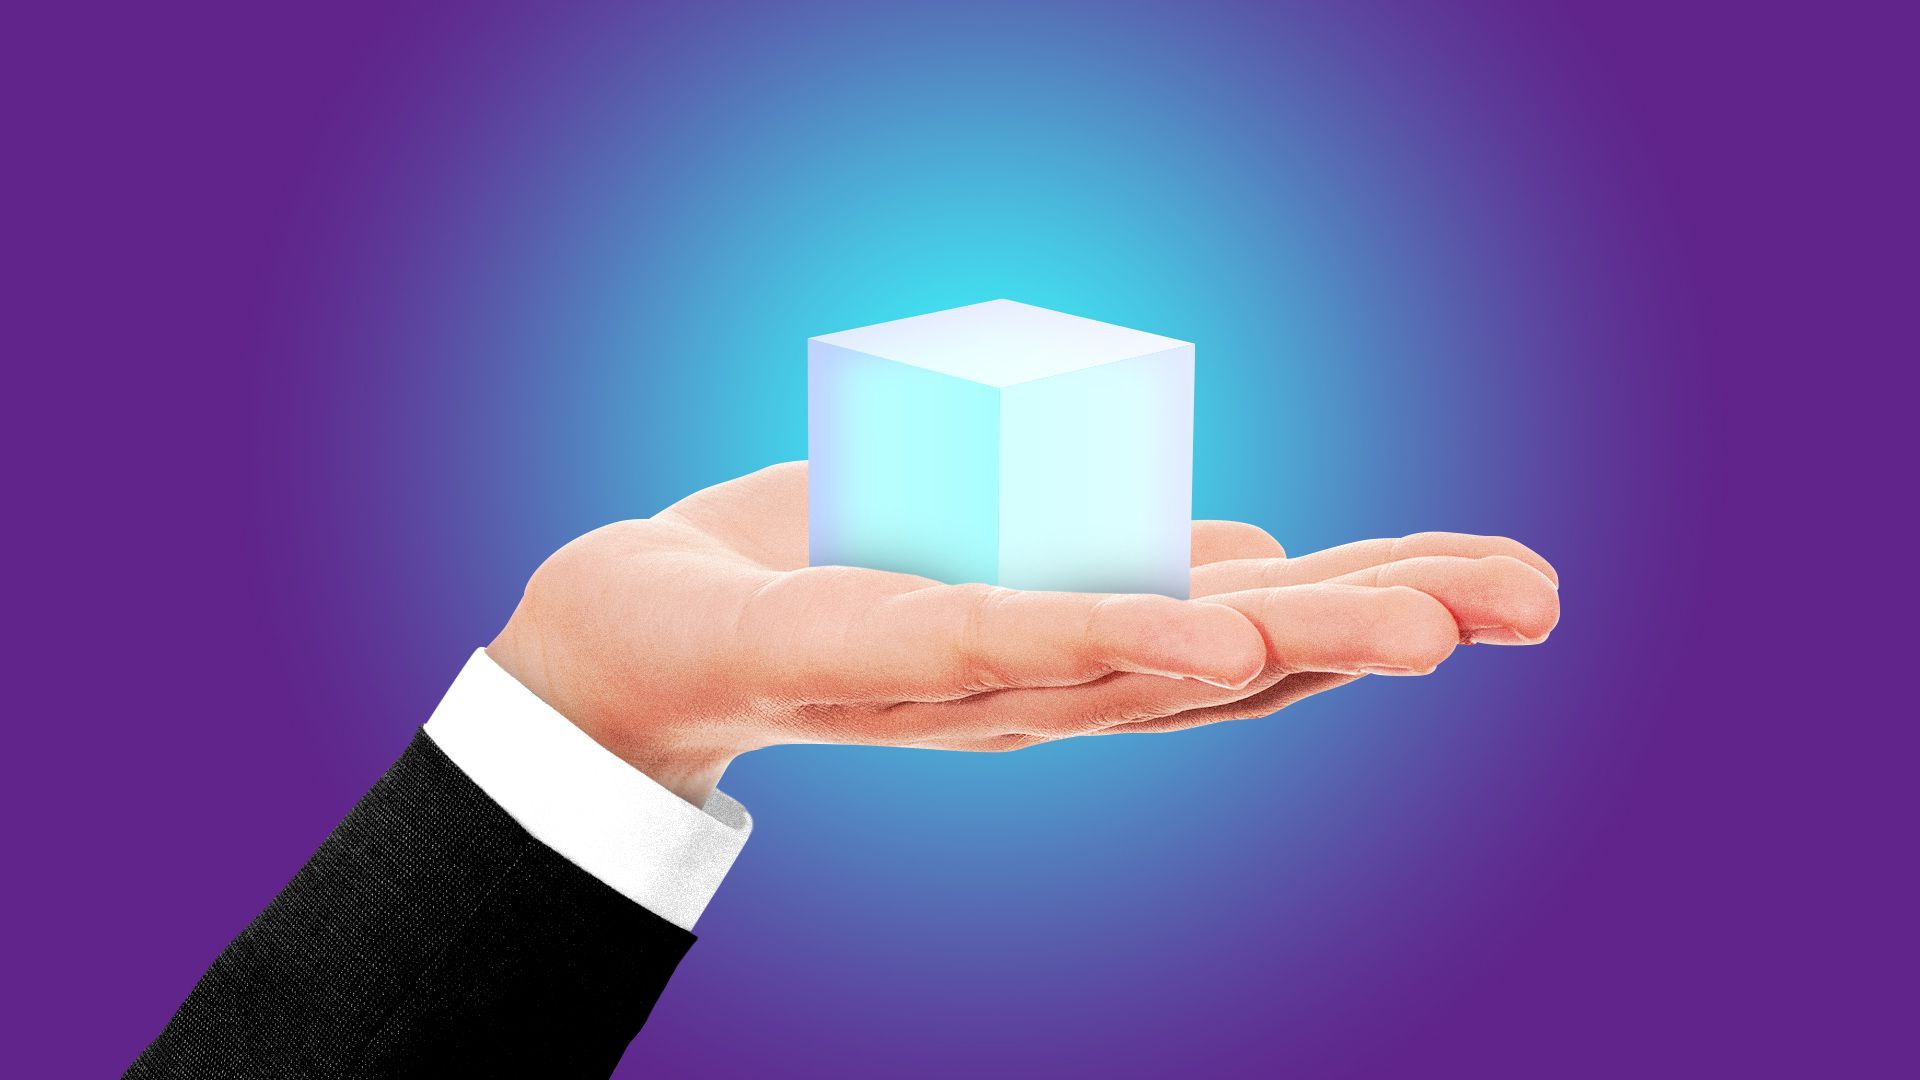 Illustration of a hand holding out a glowing cube.